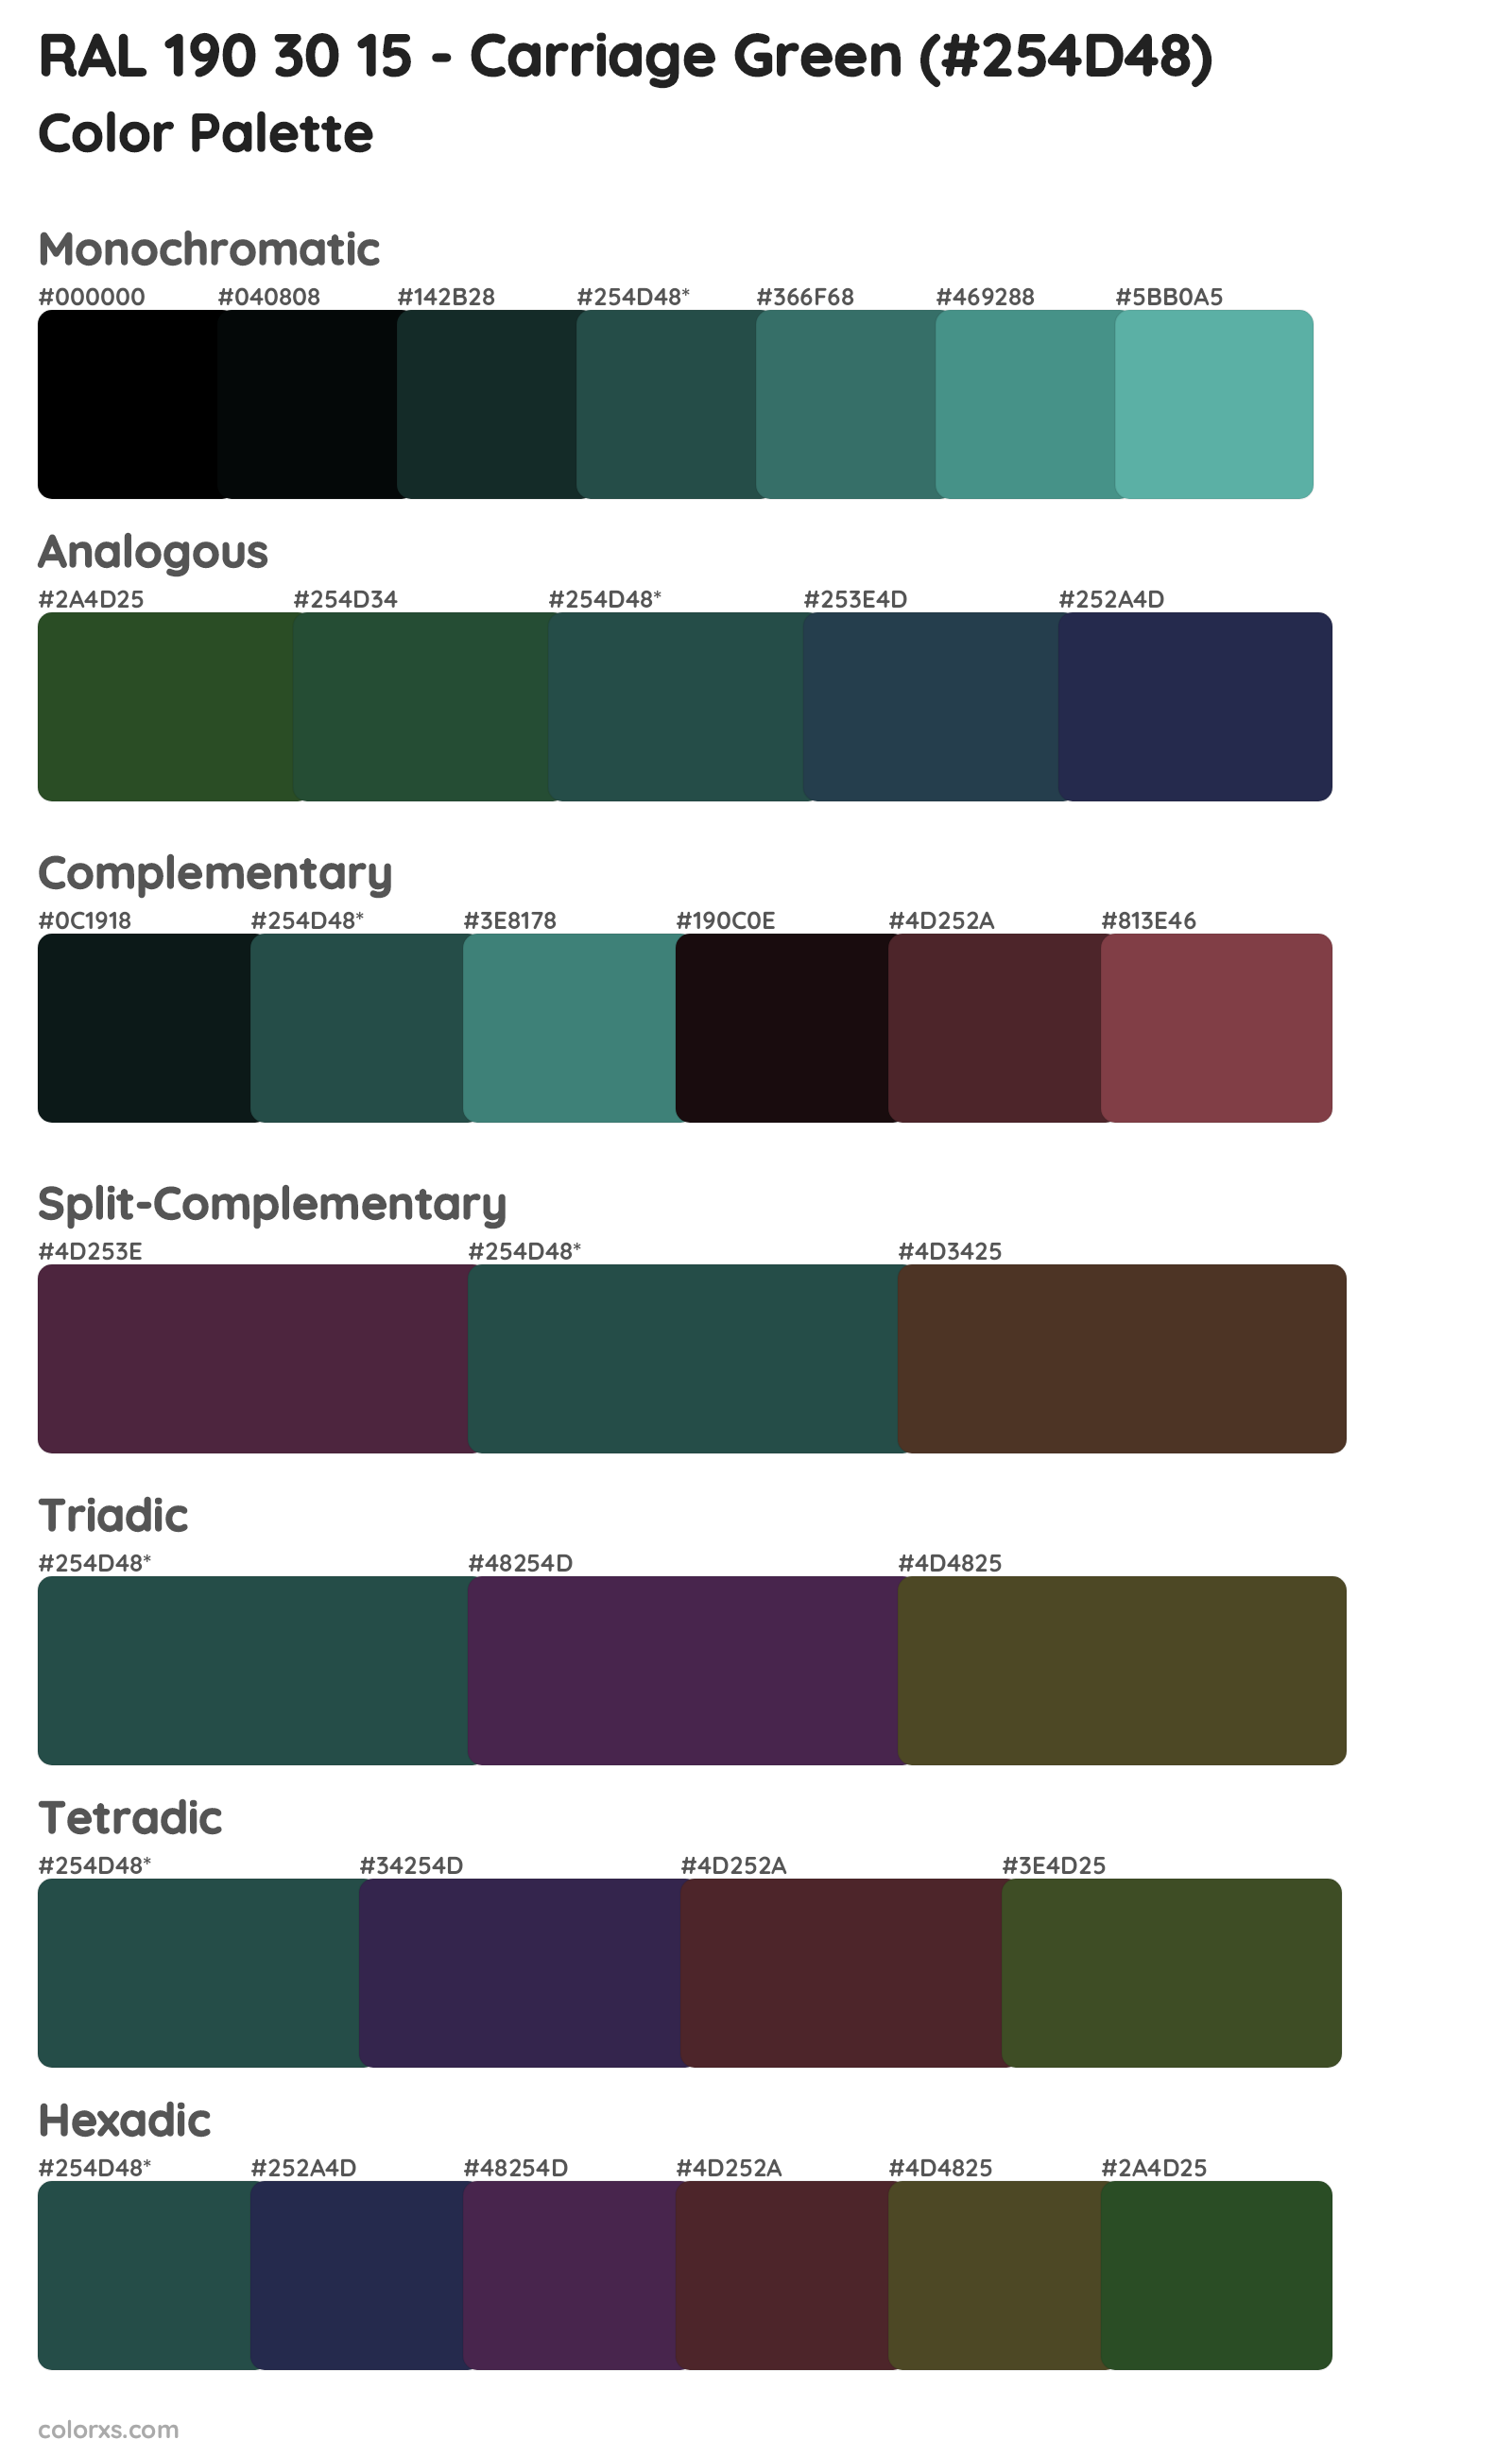 RAL 190 30 15 - Carriage Green Color Scheme Palettes